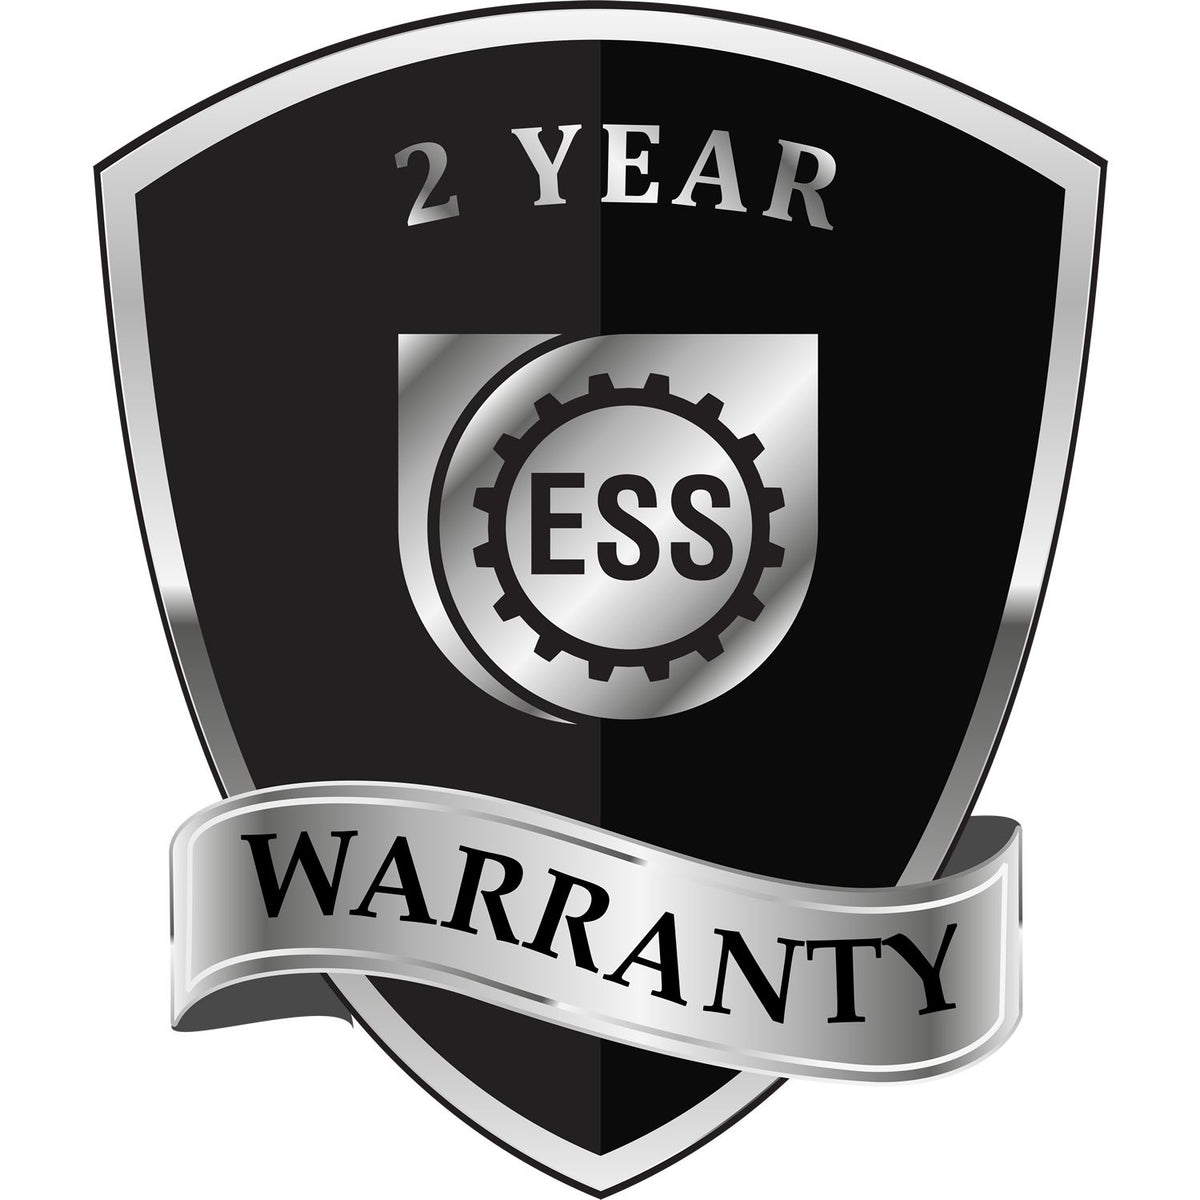 A badge or emblem showing a warranty icon for the Heavy Duty Cast Iron Florida Architect Embosser